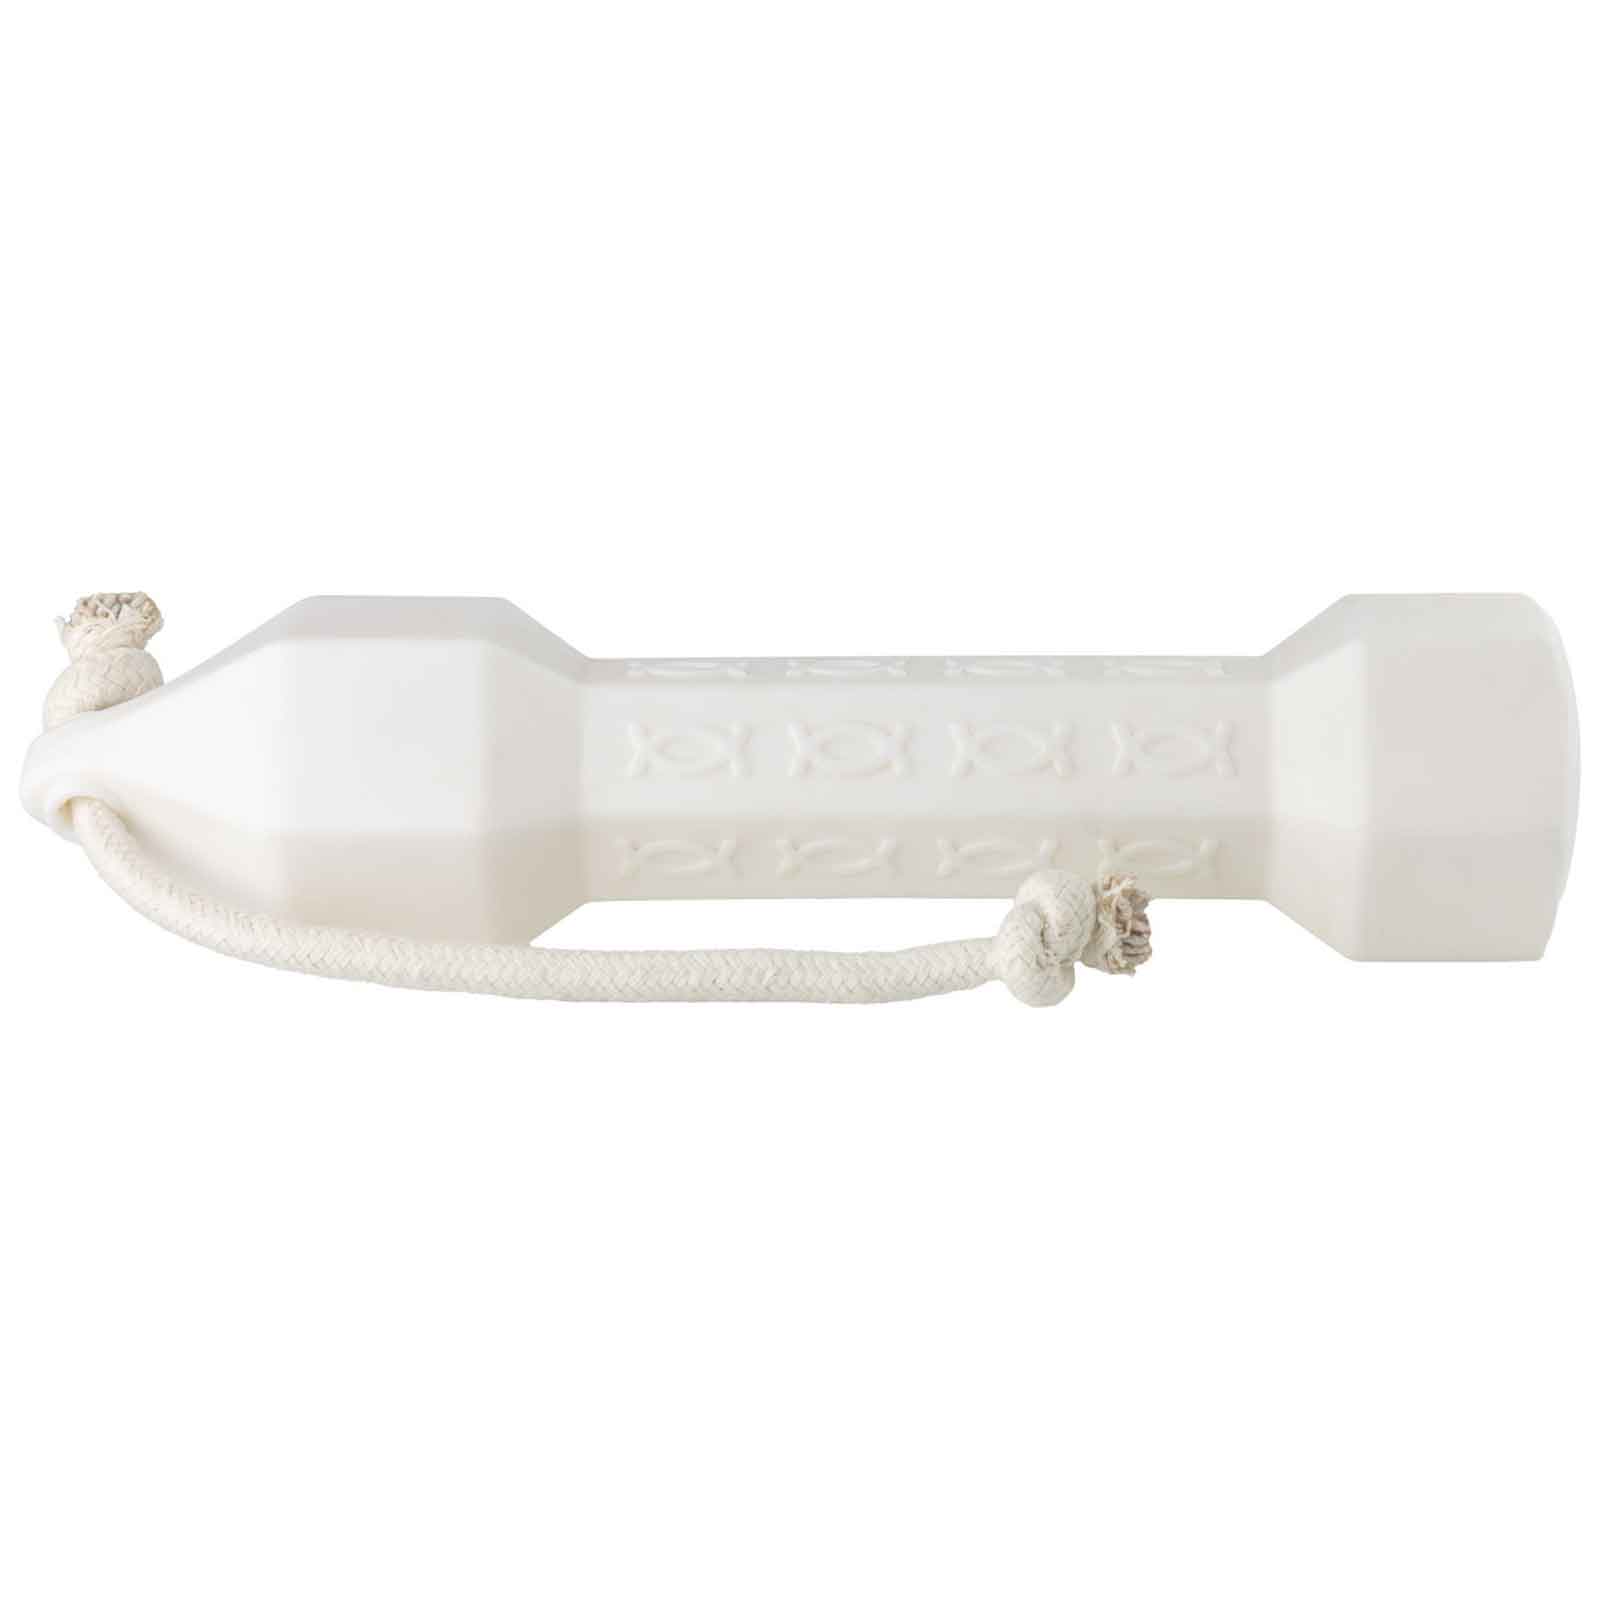 Hp & G Apportier Dumby Bay Bumper 320G White